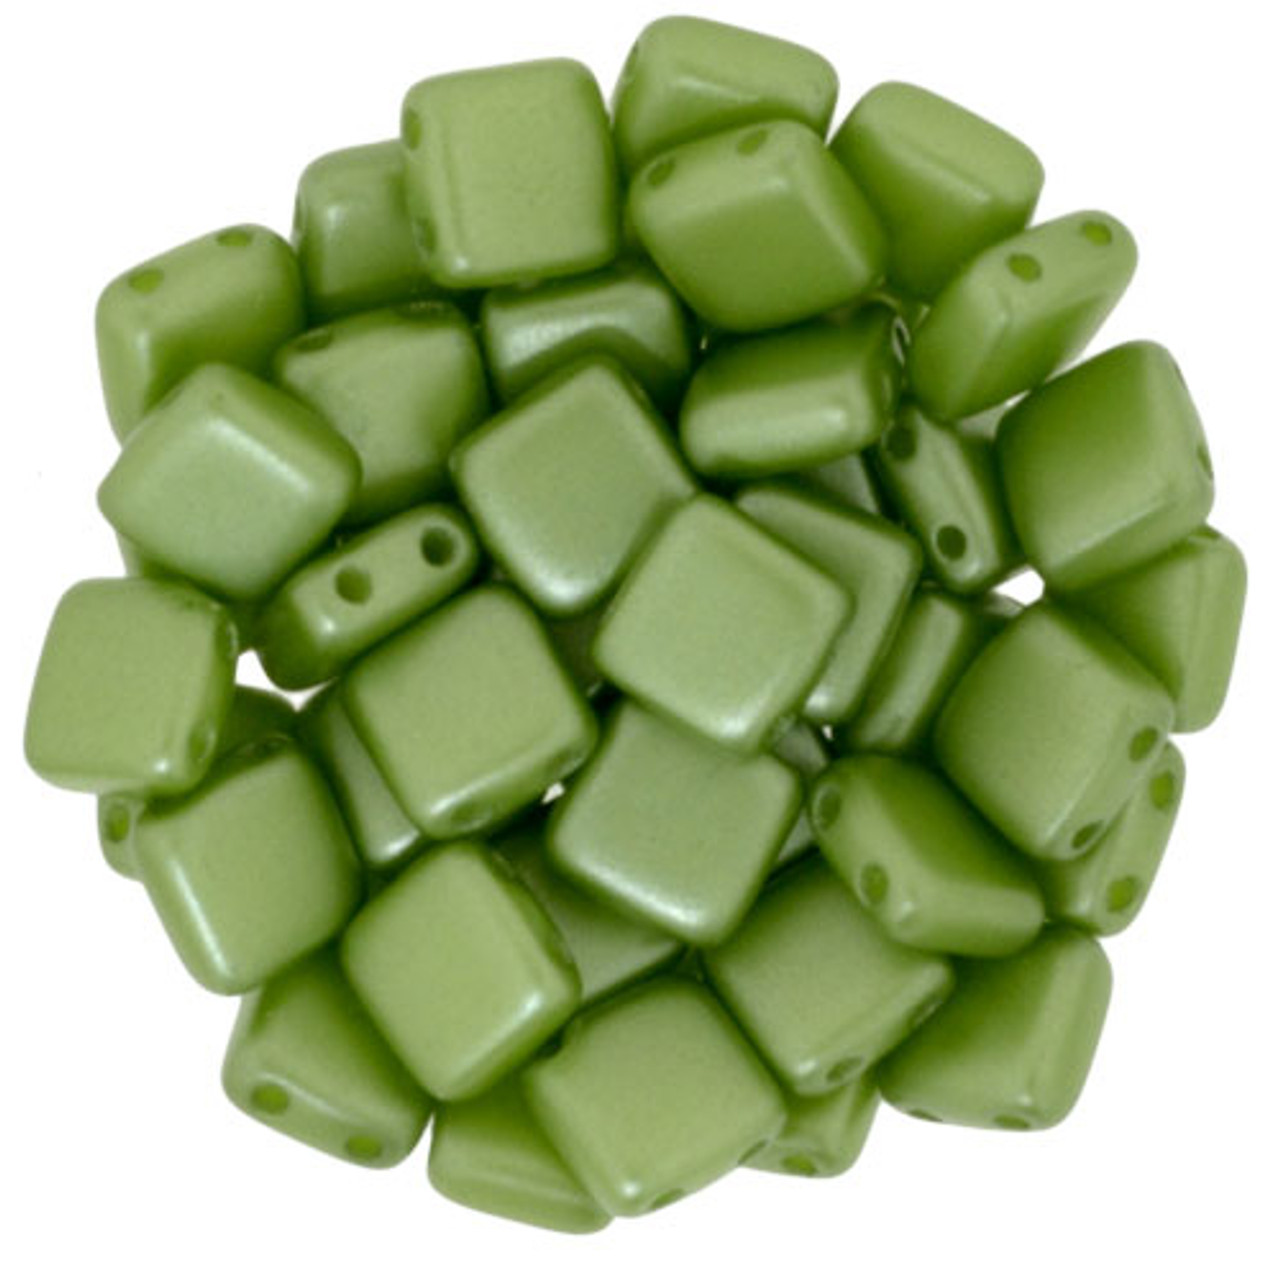 JK-7627 - Czech Glass 2 Hole Tile Beads, Matte Olive With Gold, 6mm